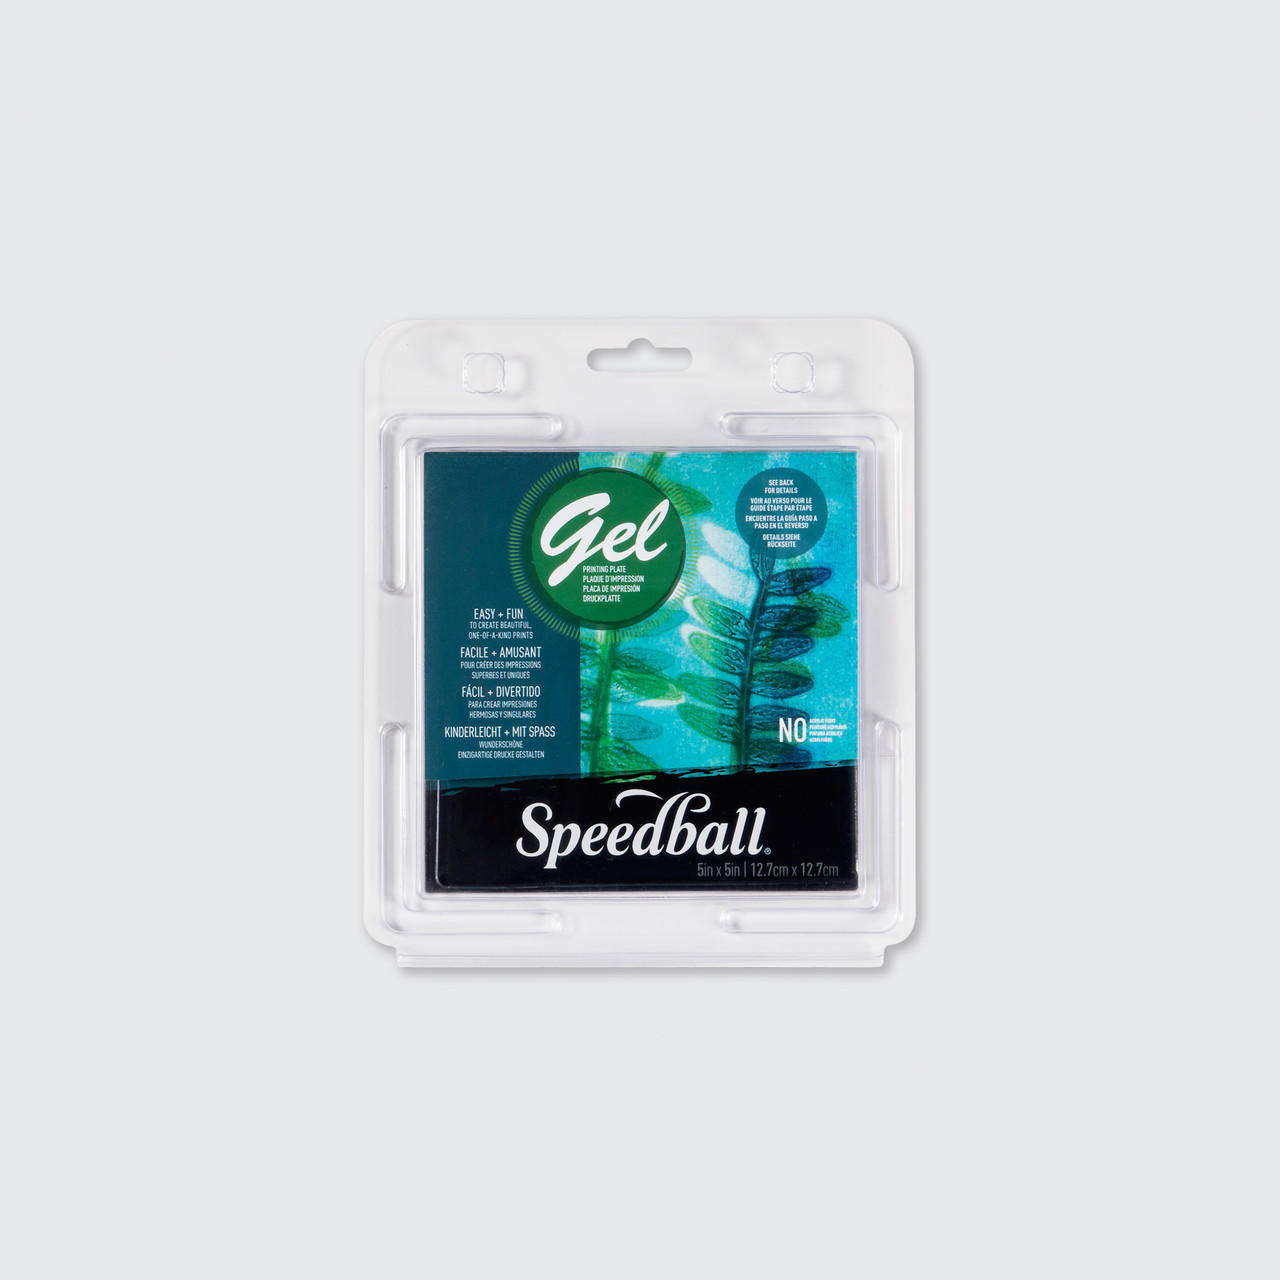 Speedball Gel Printing Plate 5 x 5 inches